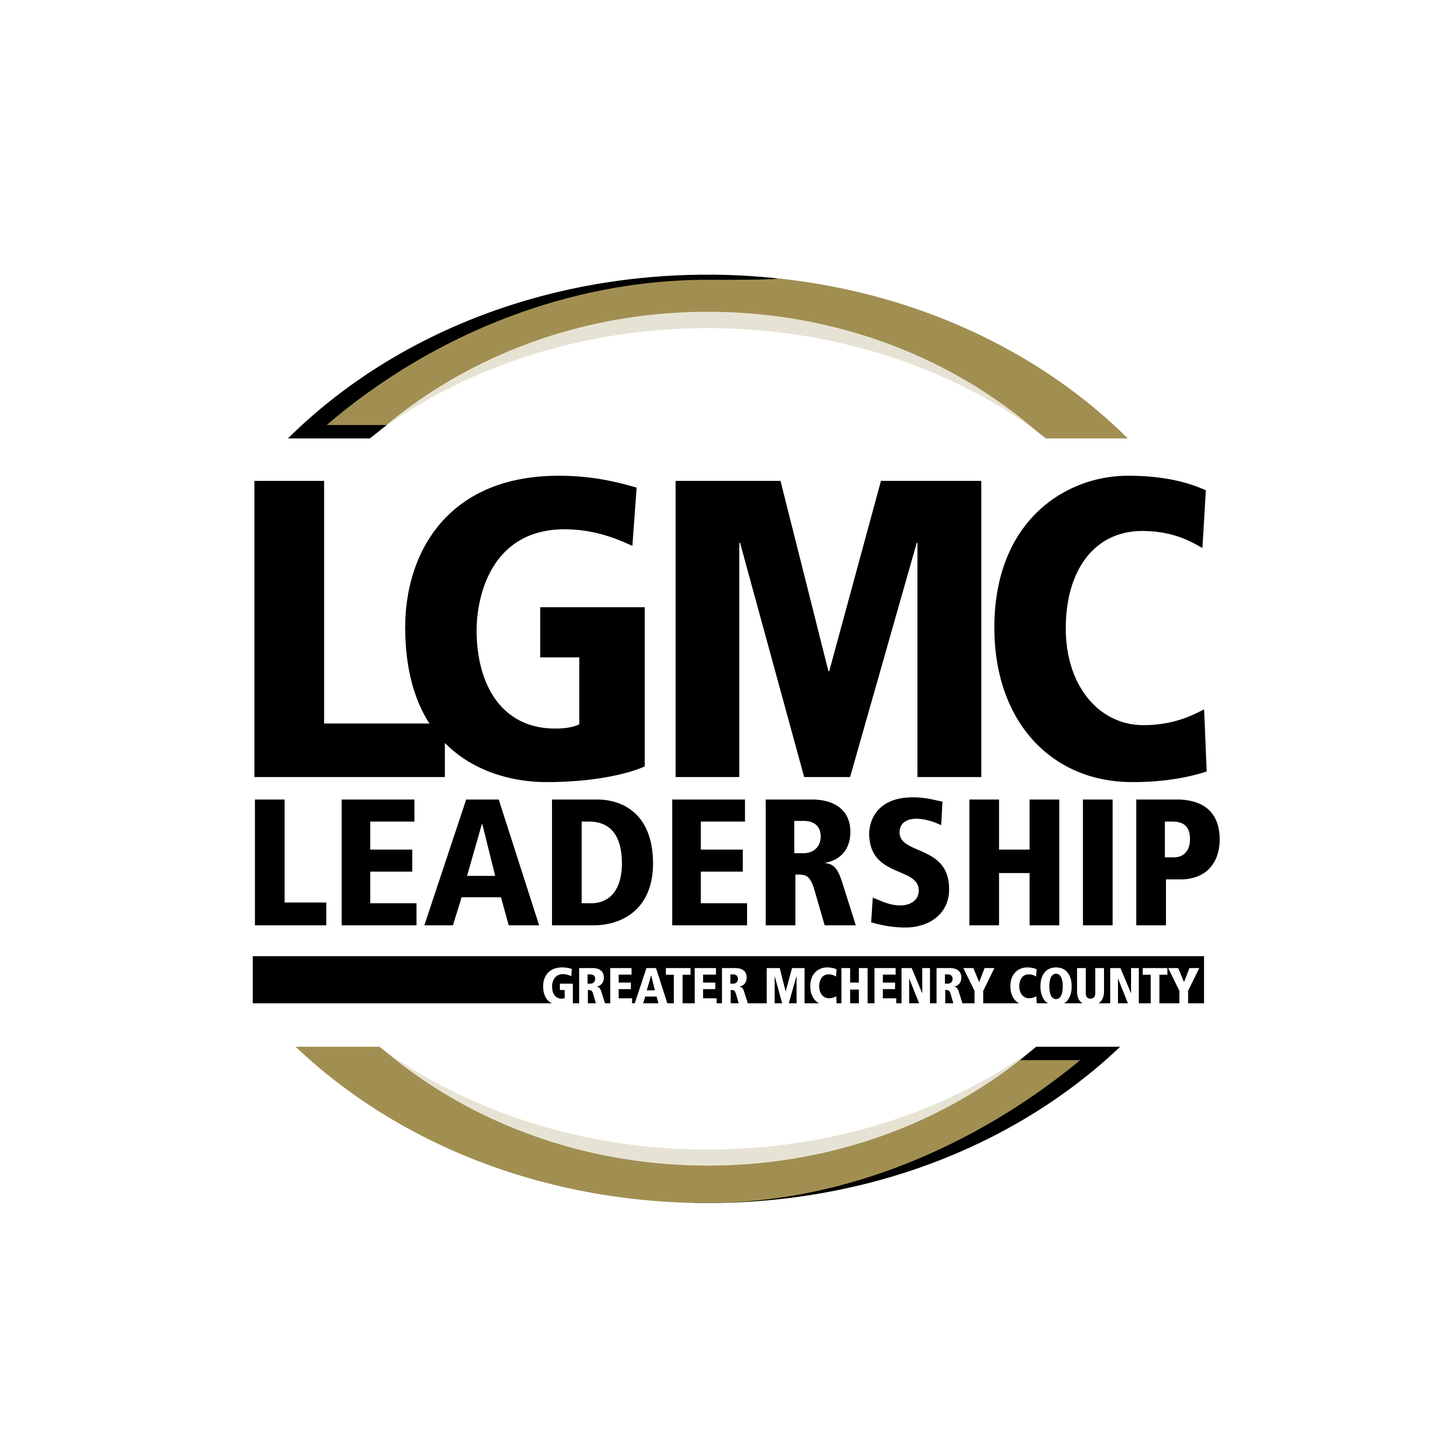 Leadership greater mchenry county.